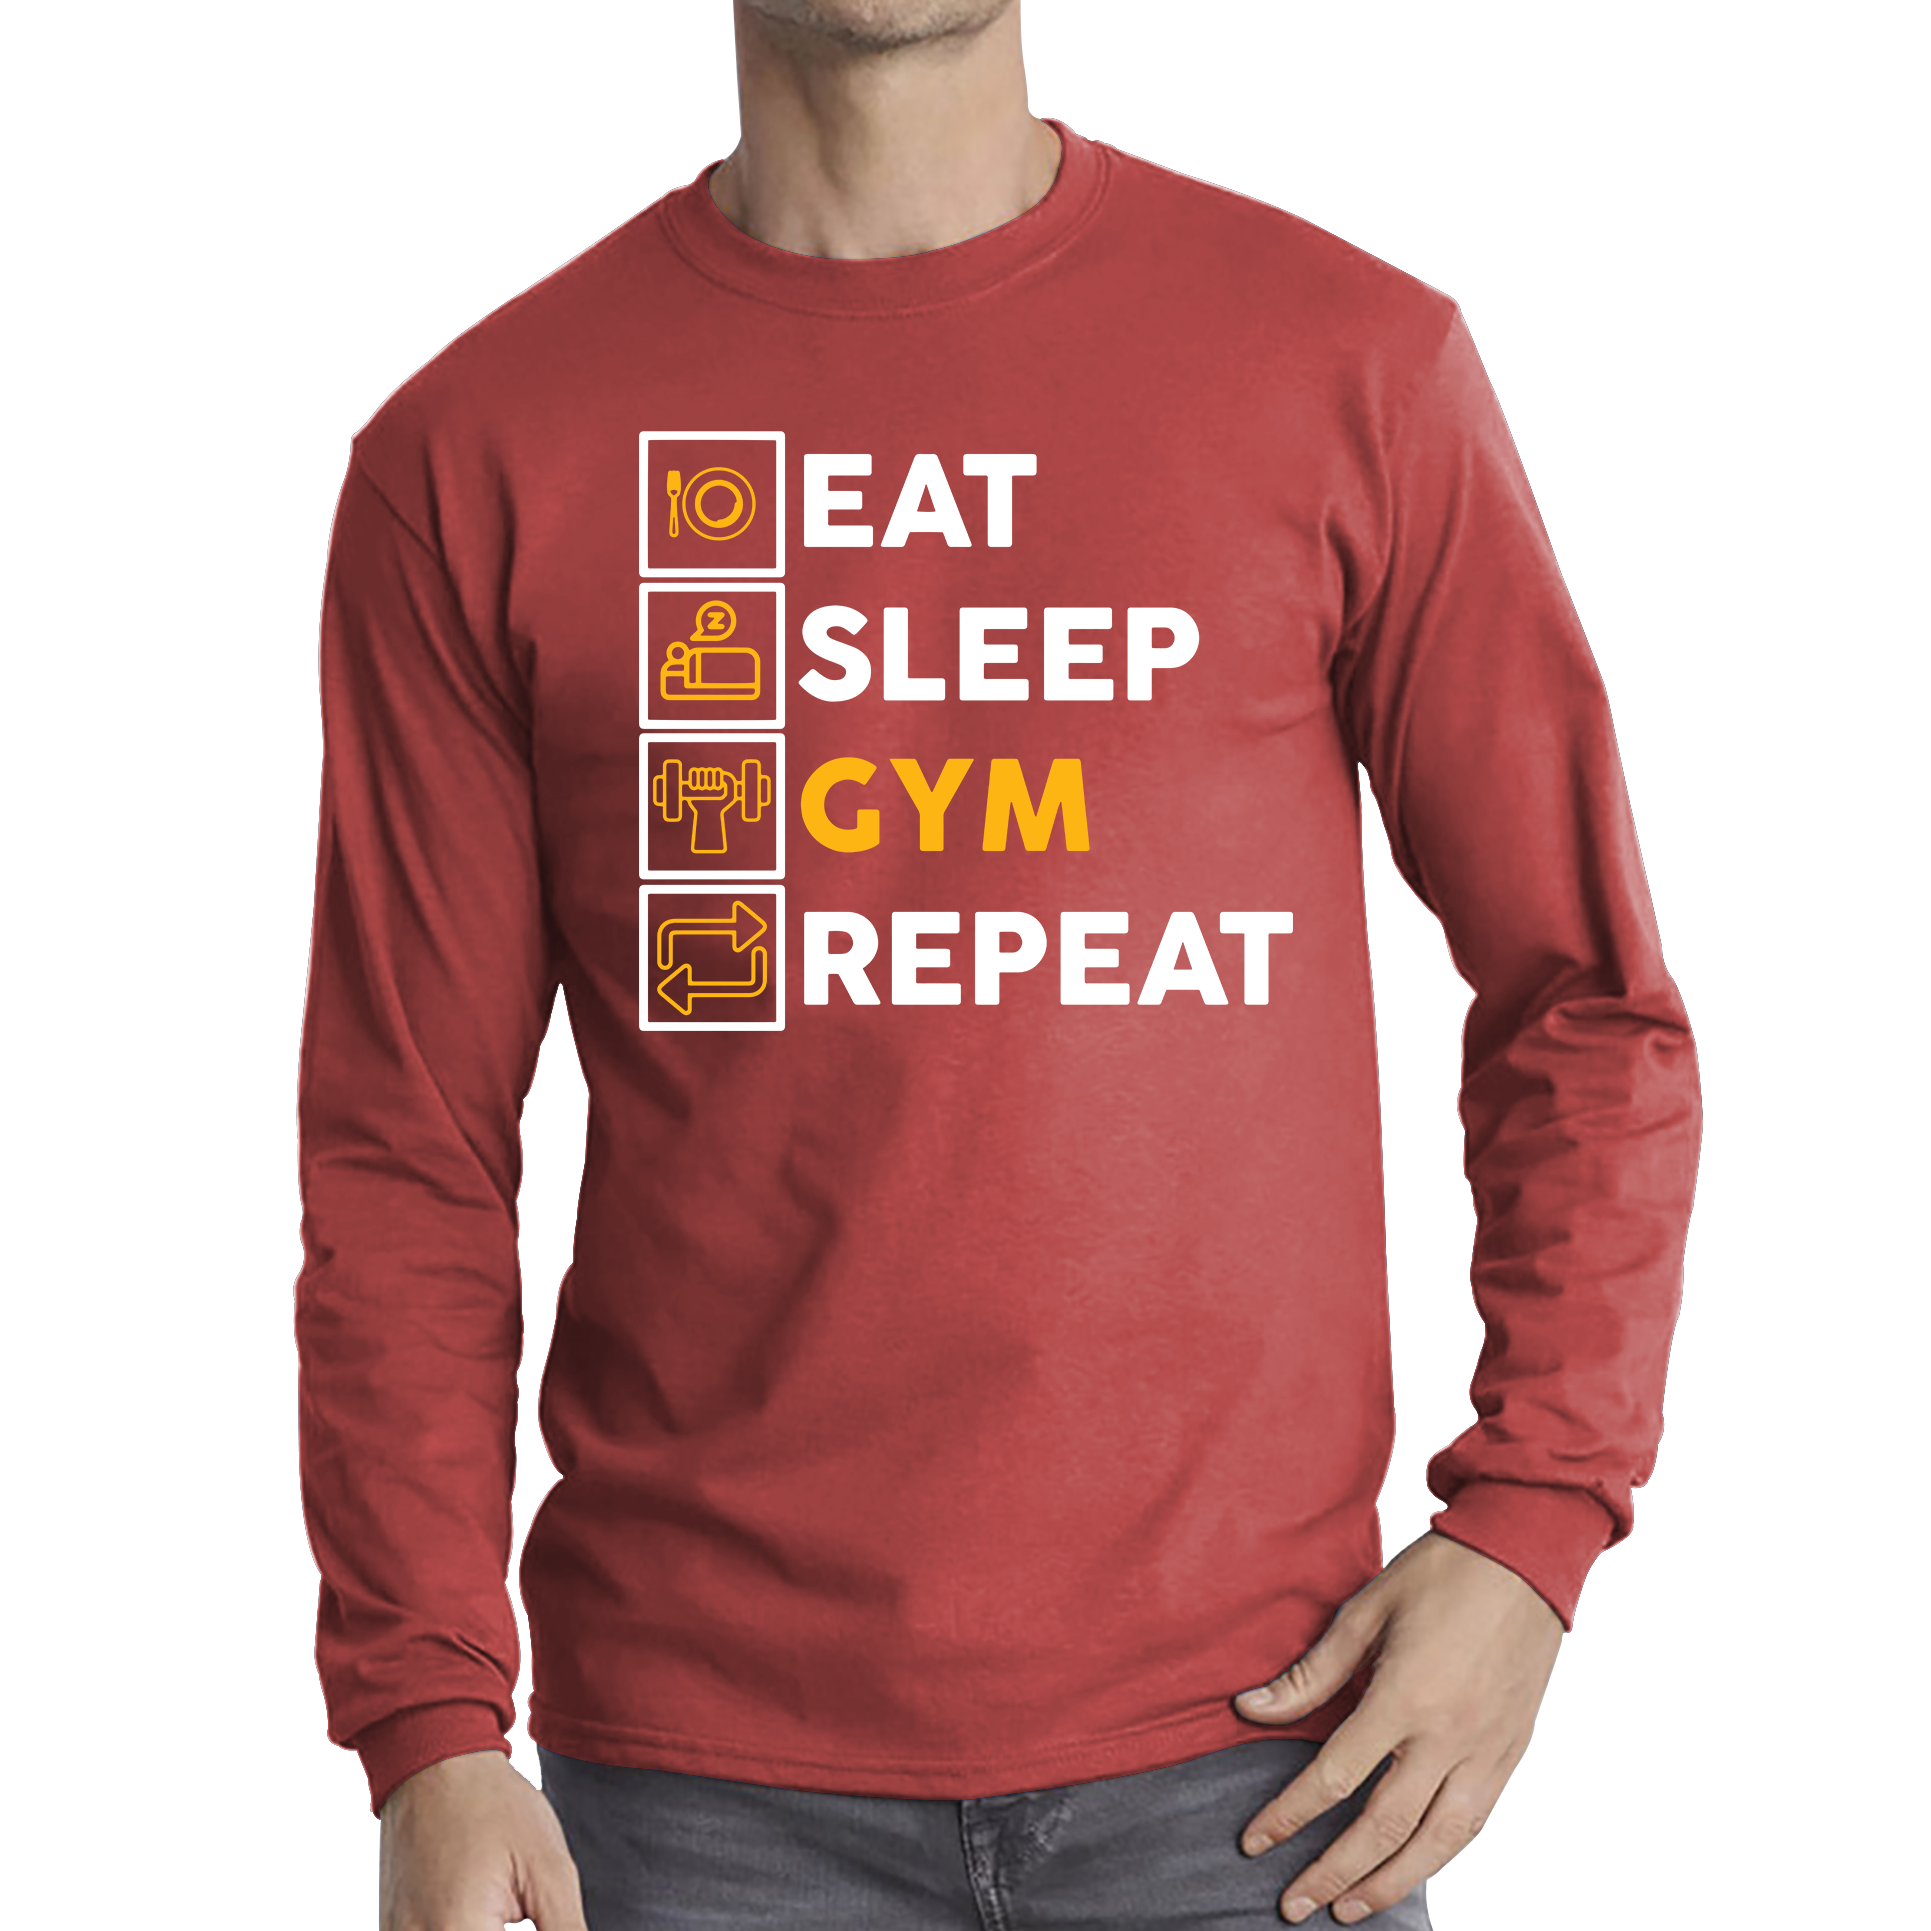 Eat Sleep Gym Repeat Funny Gym Workout Fitness Adult Long Sleeve T Shirt